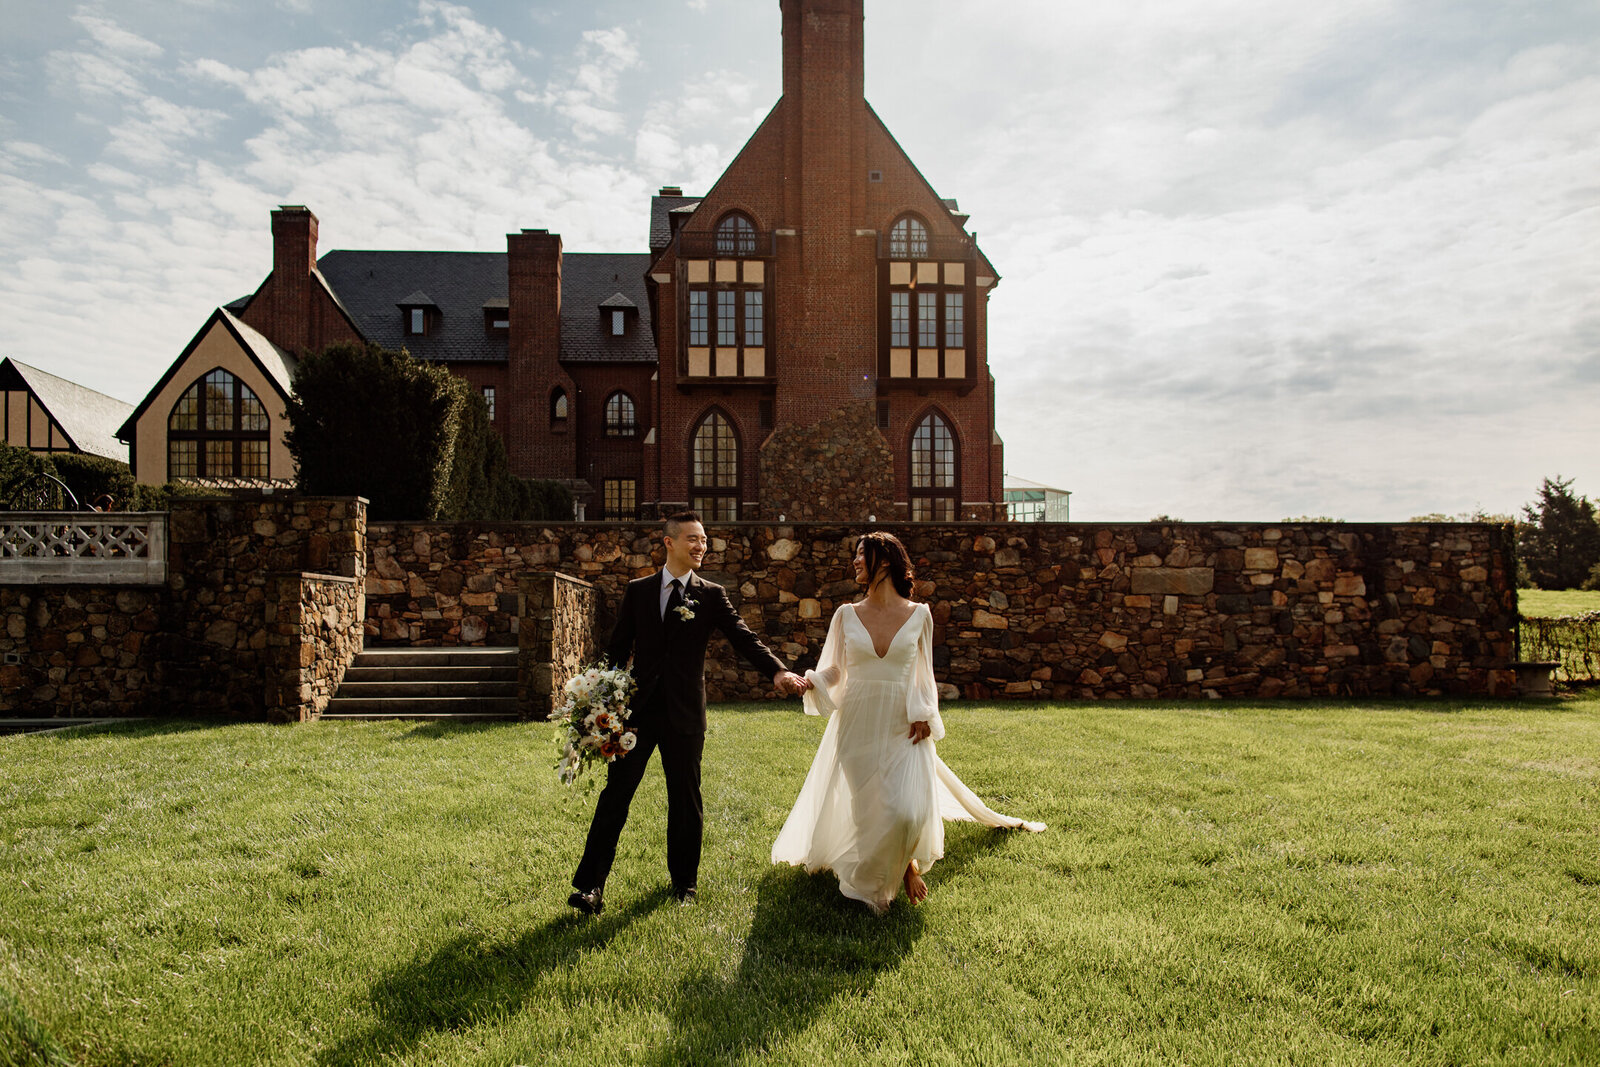 Wedding couple walking on lawn in front of wedding venue